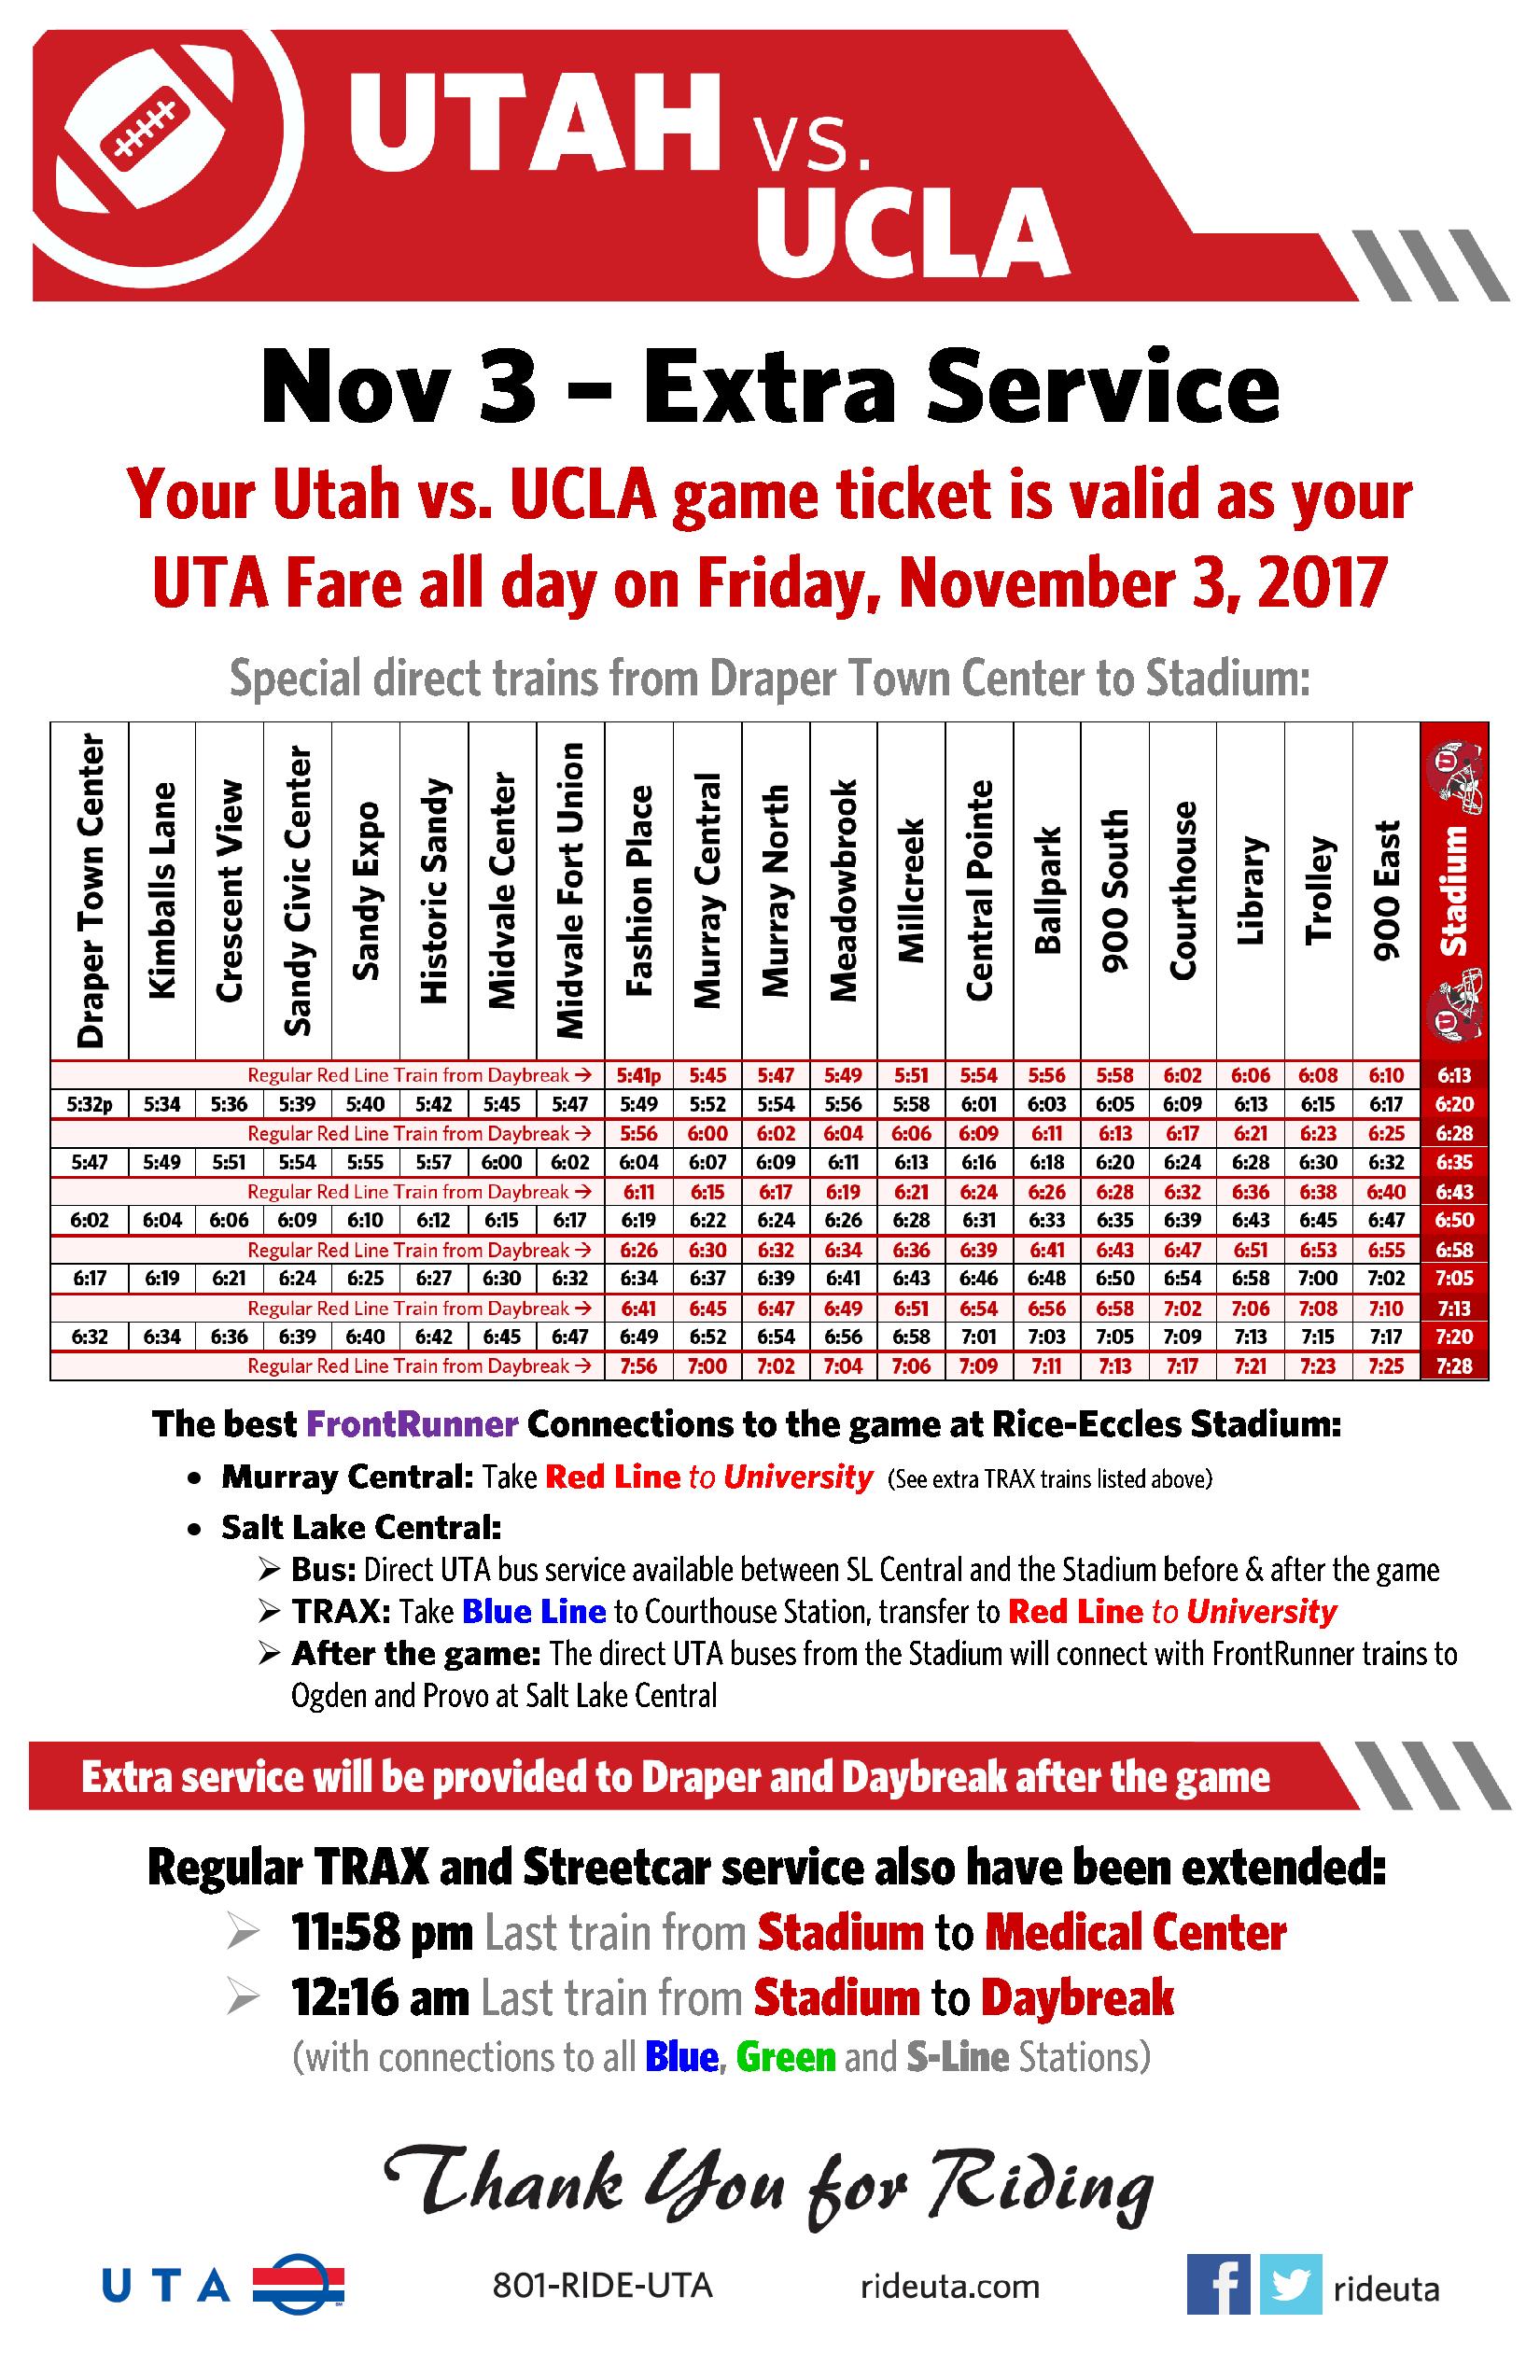 extra rail service after utah game